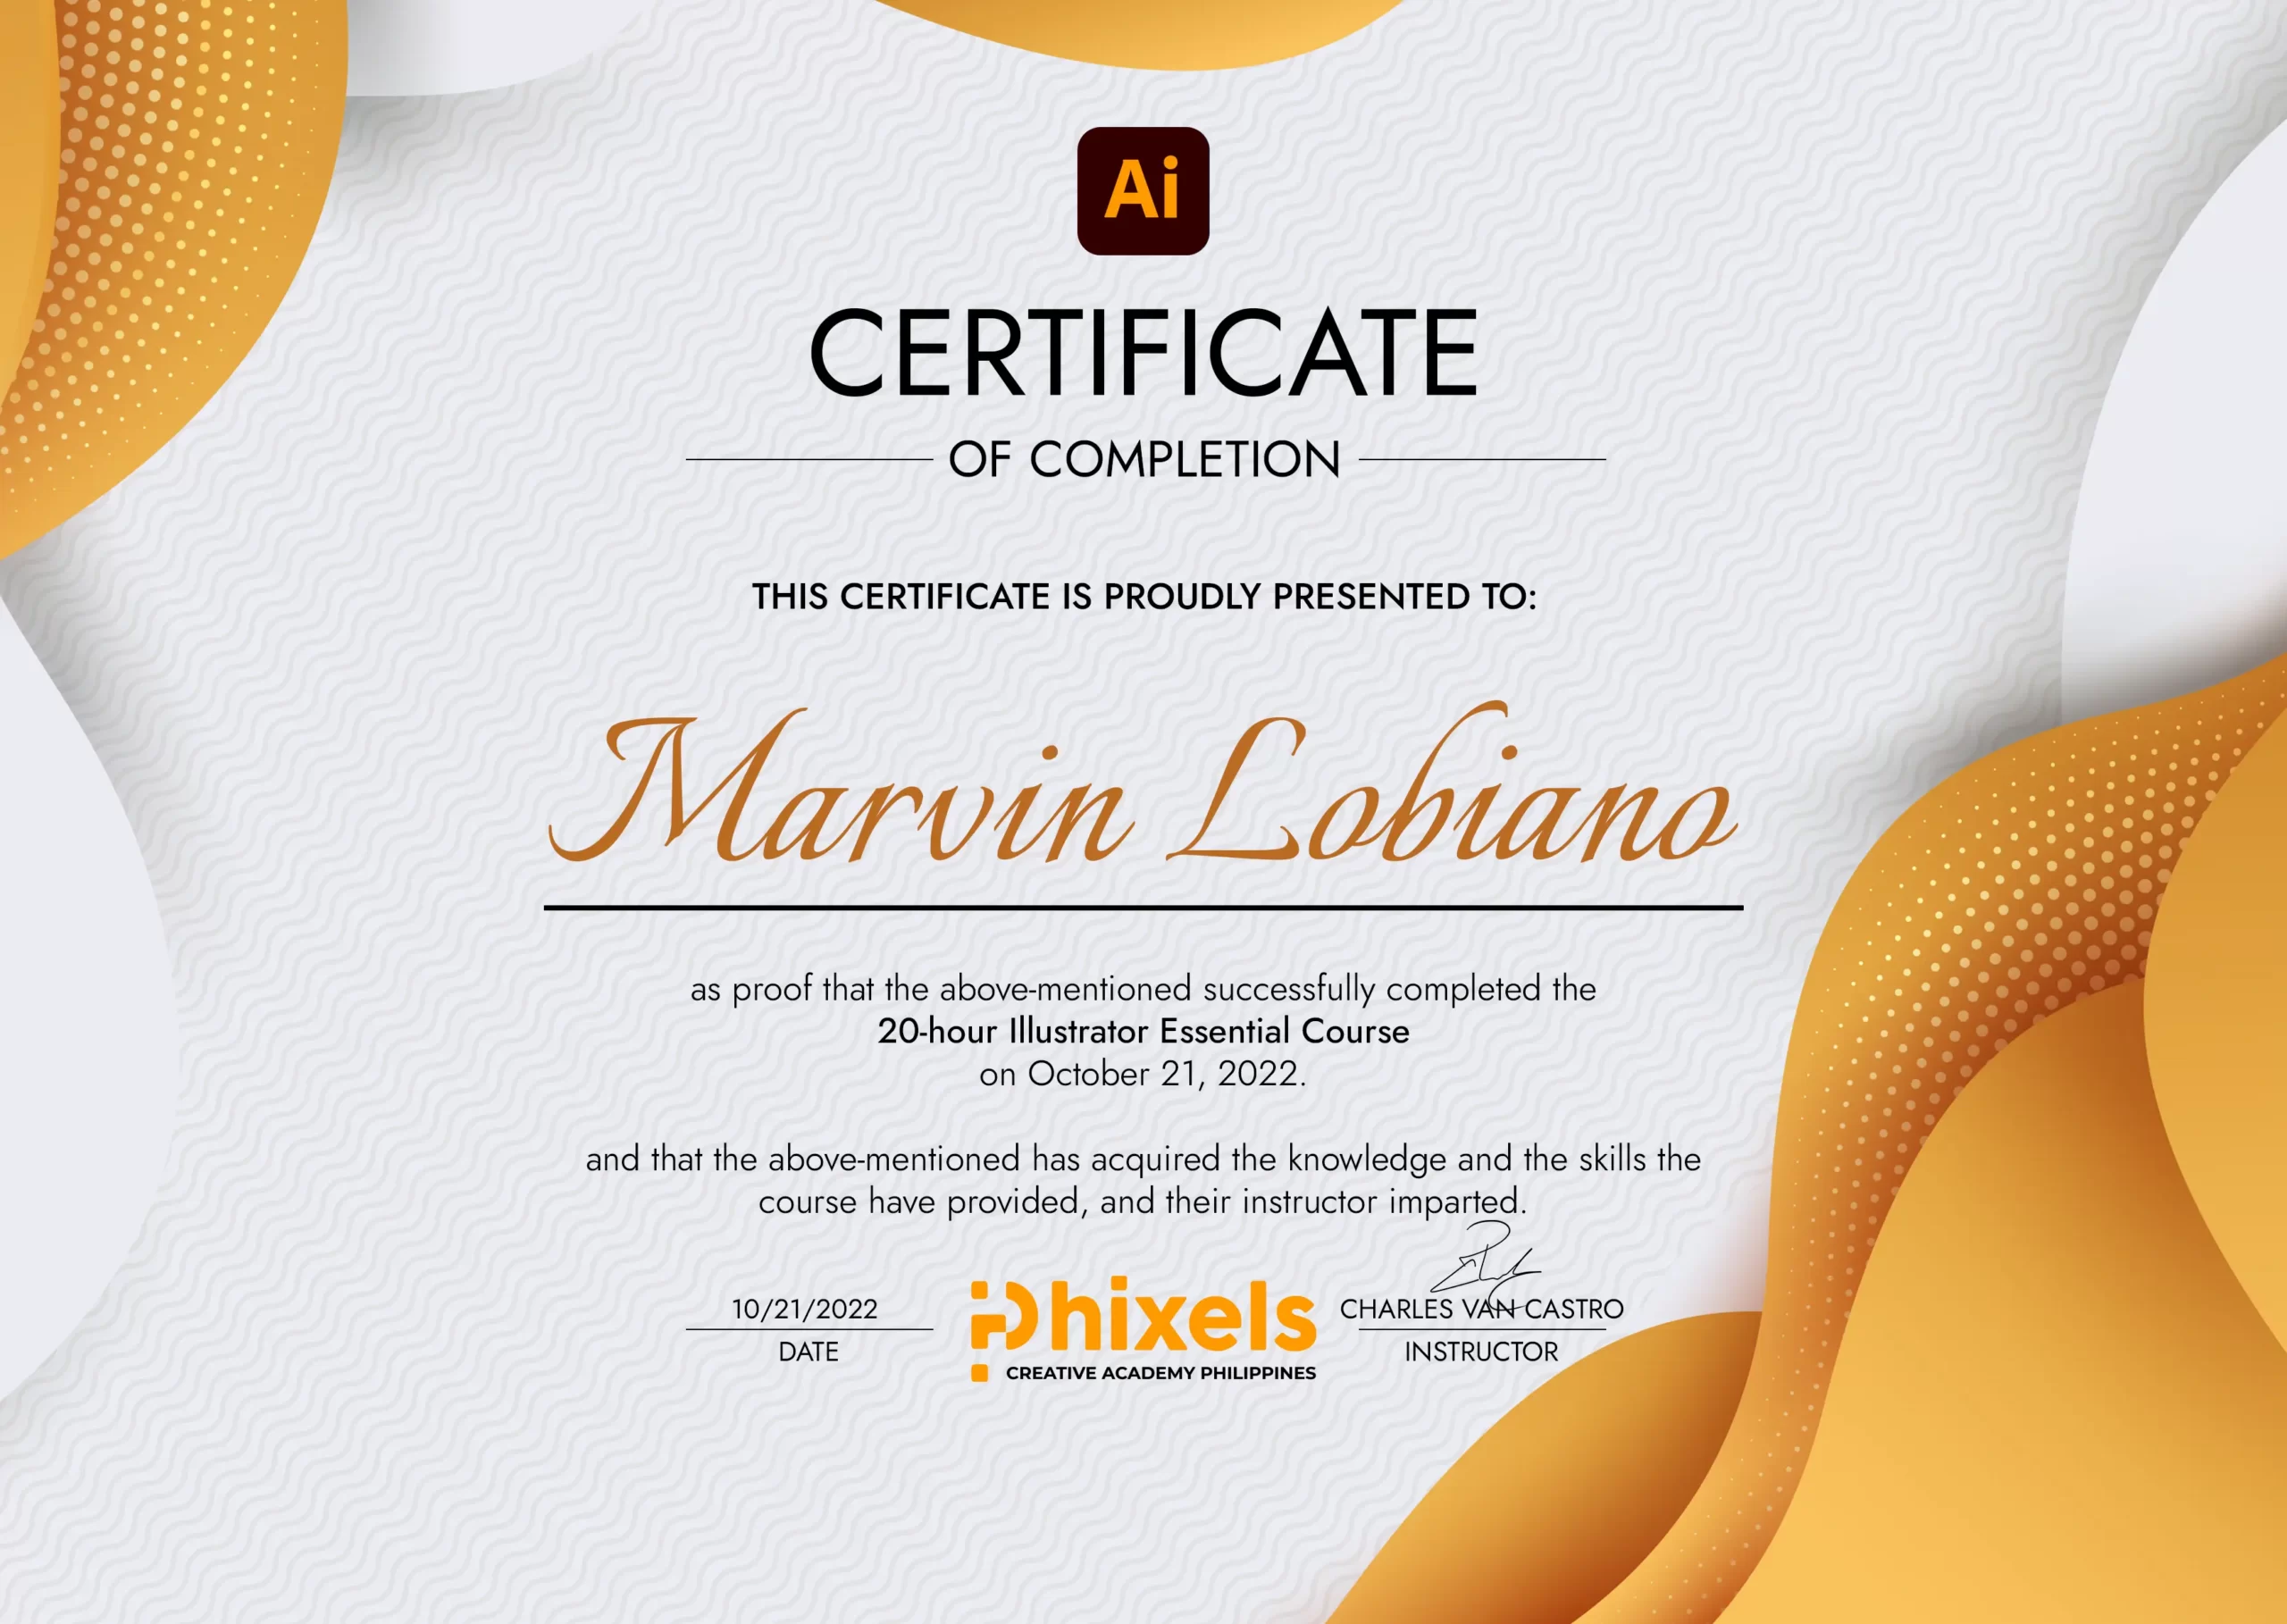 Marvin Lobiano has a Certificate of Adobe Illustrator